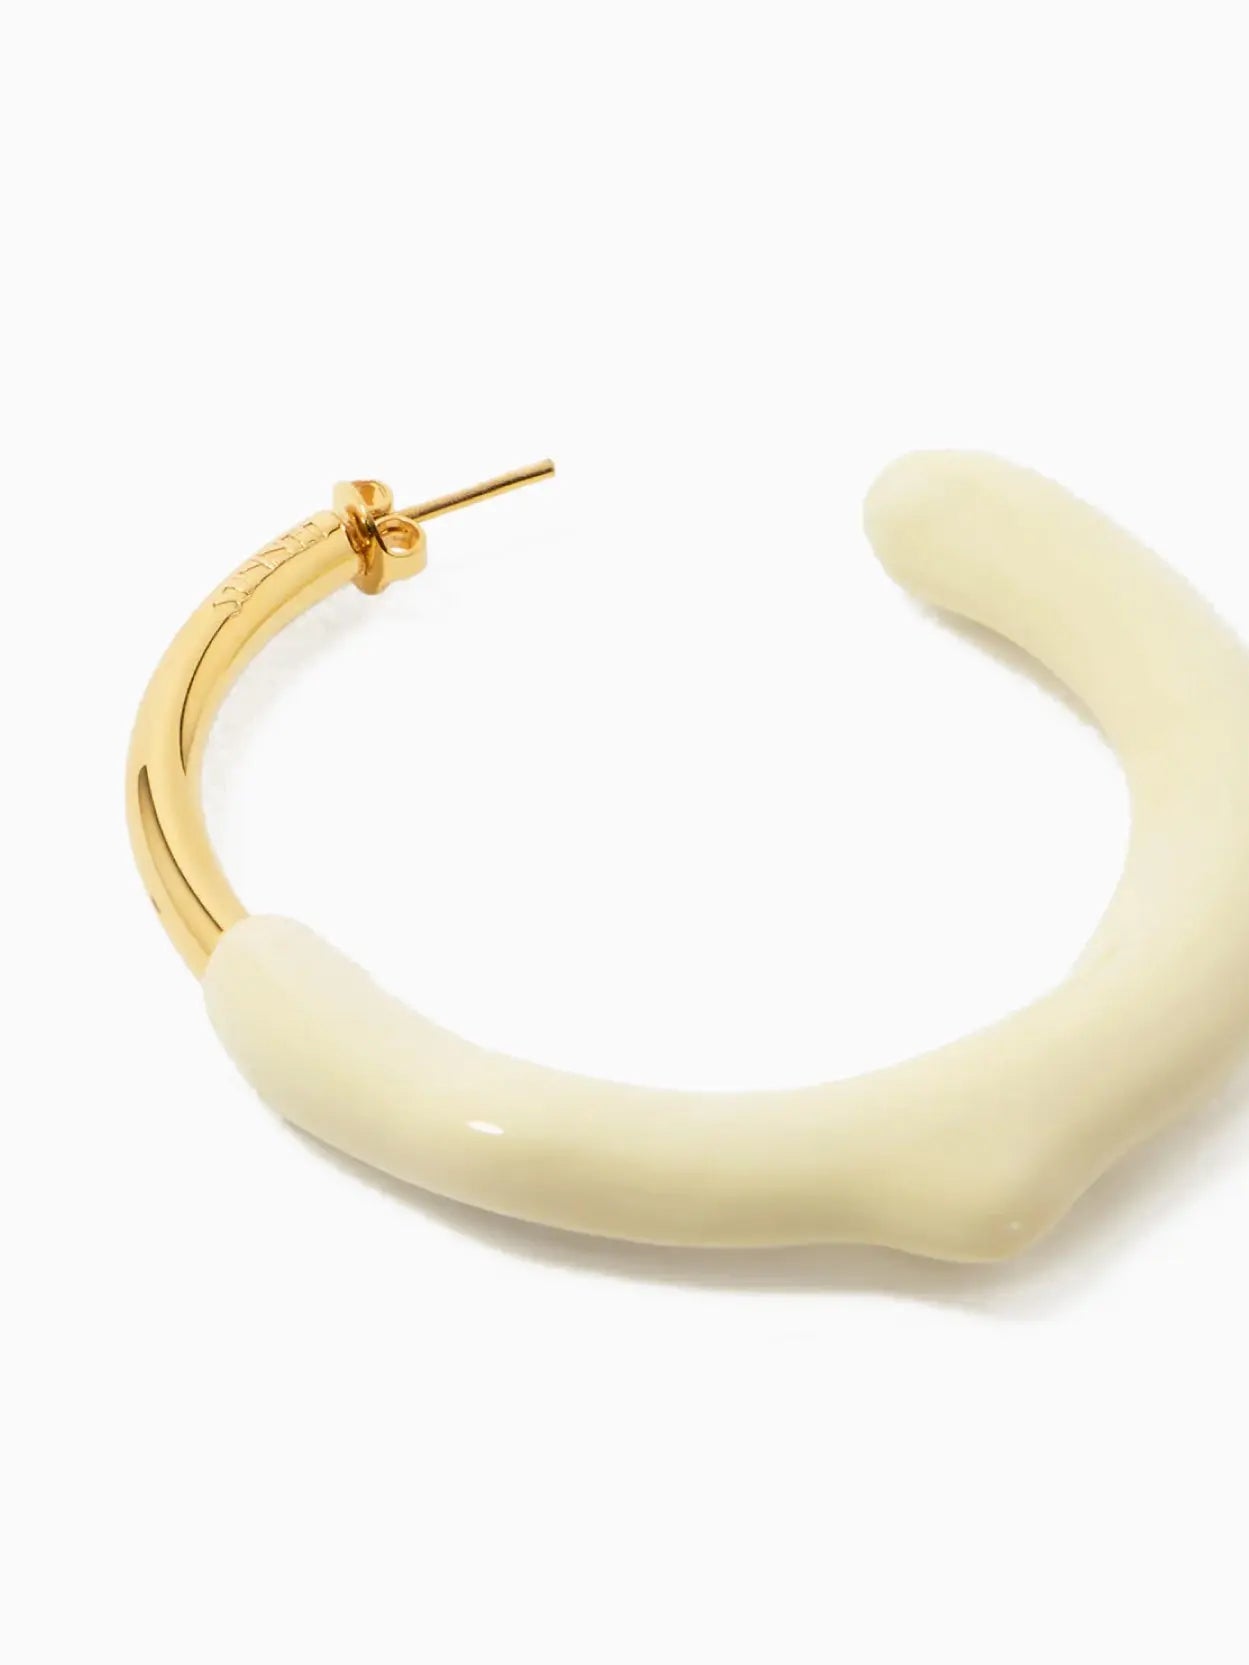 Discover a pair of Sunnei Rubberized Hoop Earrings featuring partial hoops with gold-toned metal at the top, transitioning into a wavy, cream-colored lower half. Available exclusively at Bassalstore in Barcelona, this design combines smooth metallic texture with an organic, uneven shape for a unique look.